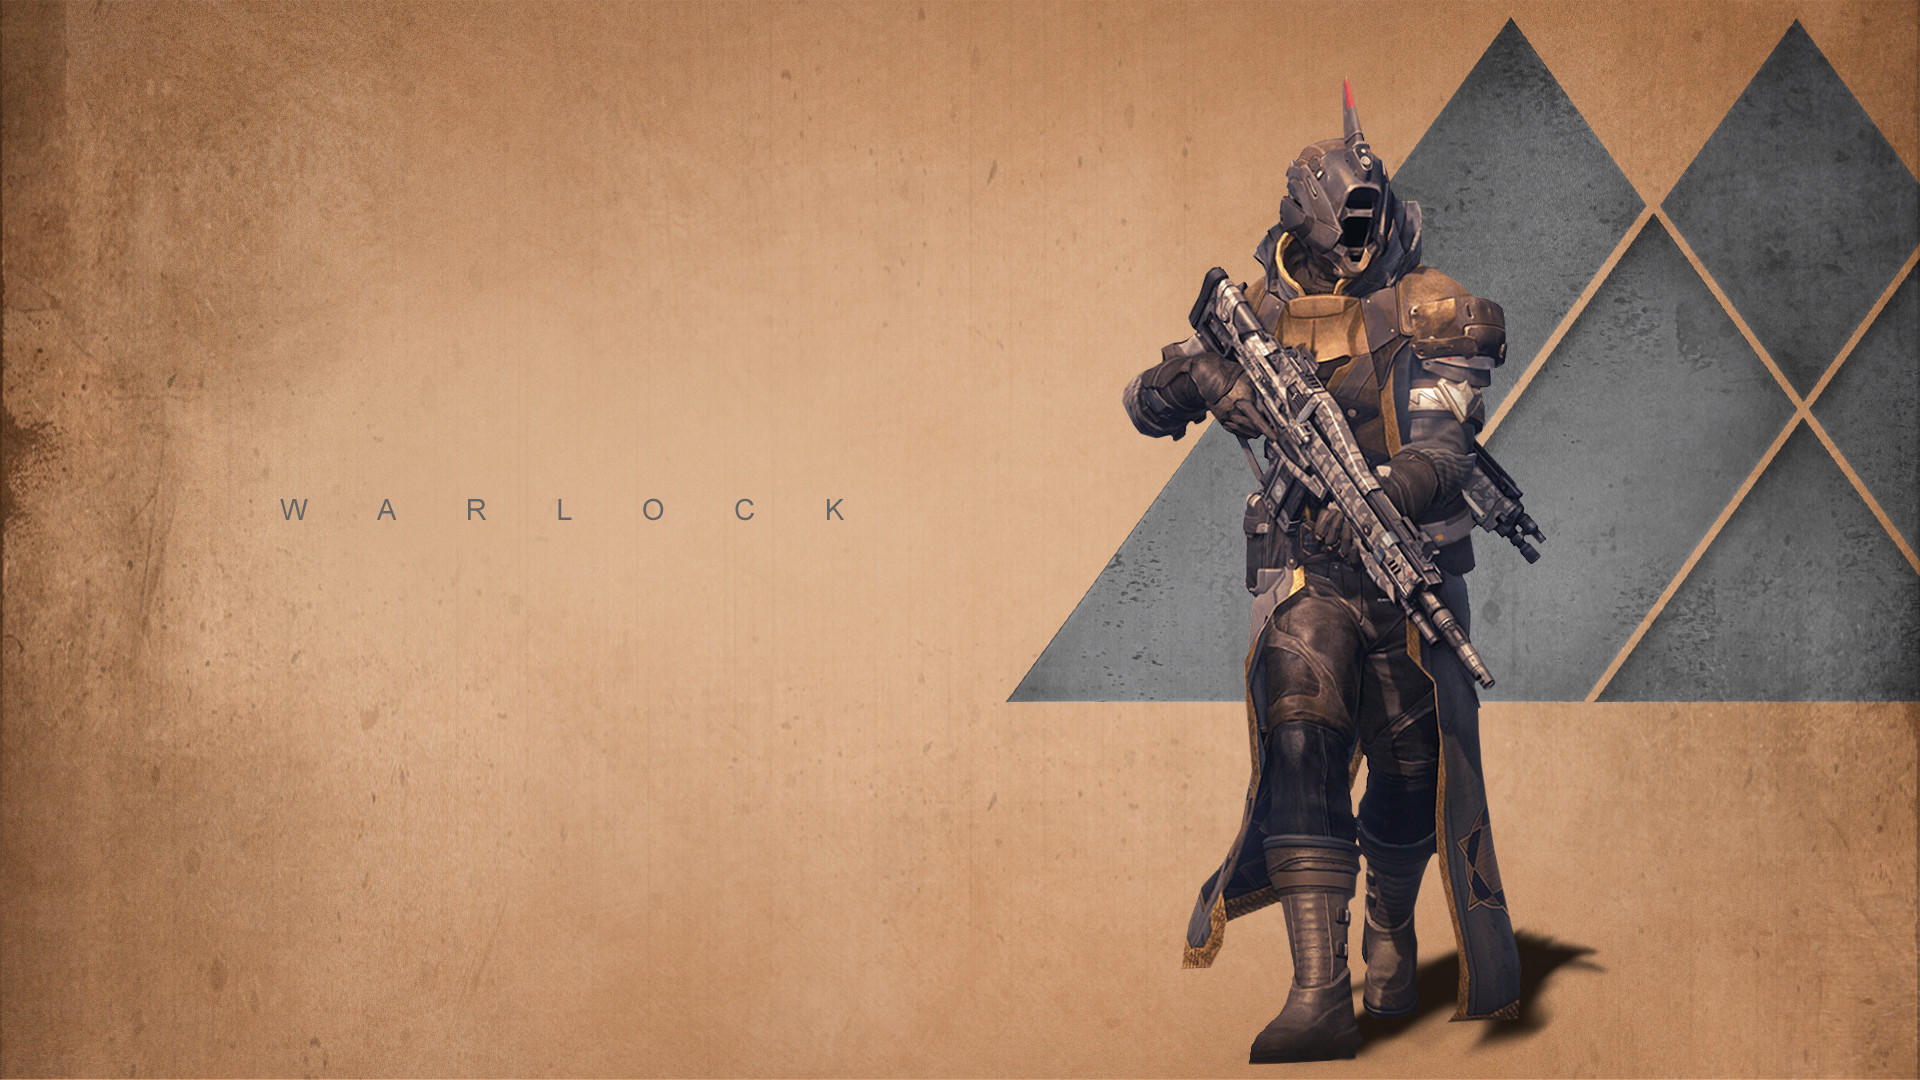 1920x1080 Destiny Warlock Wallpapers Phone with High Definition Wallpaper Resolution   px 489.19 KB Games Iphone Bungie